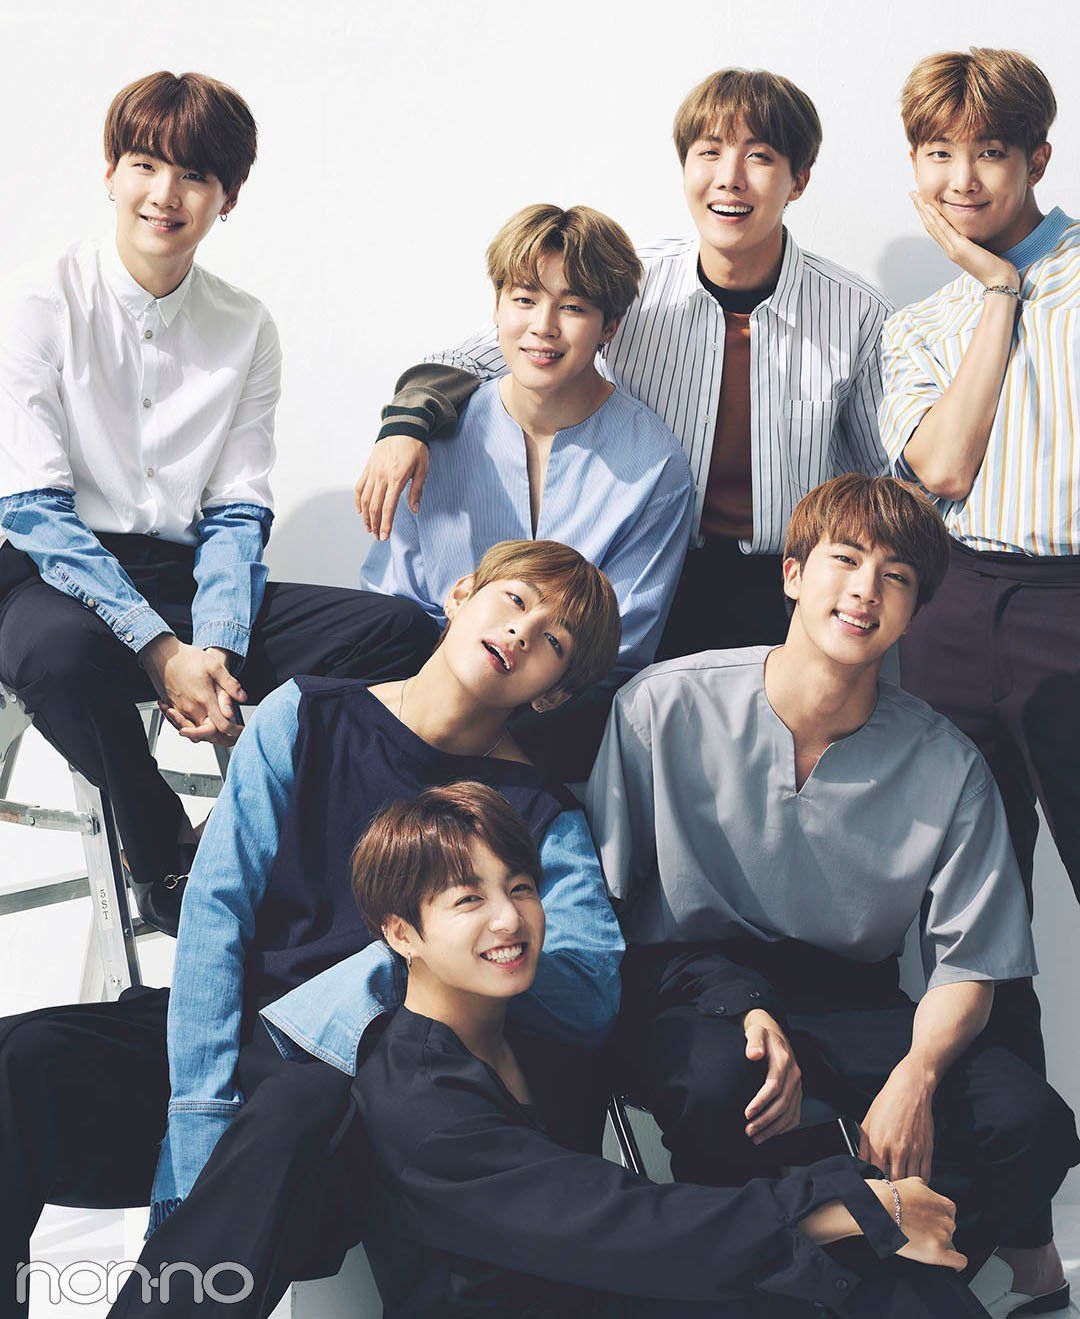 Cute Bts Group Wallpapers